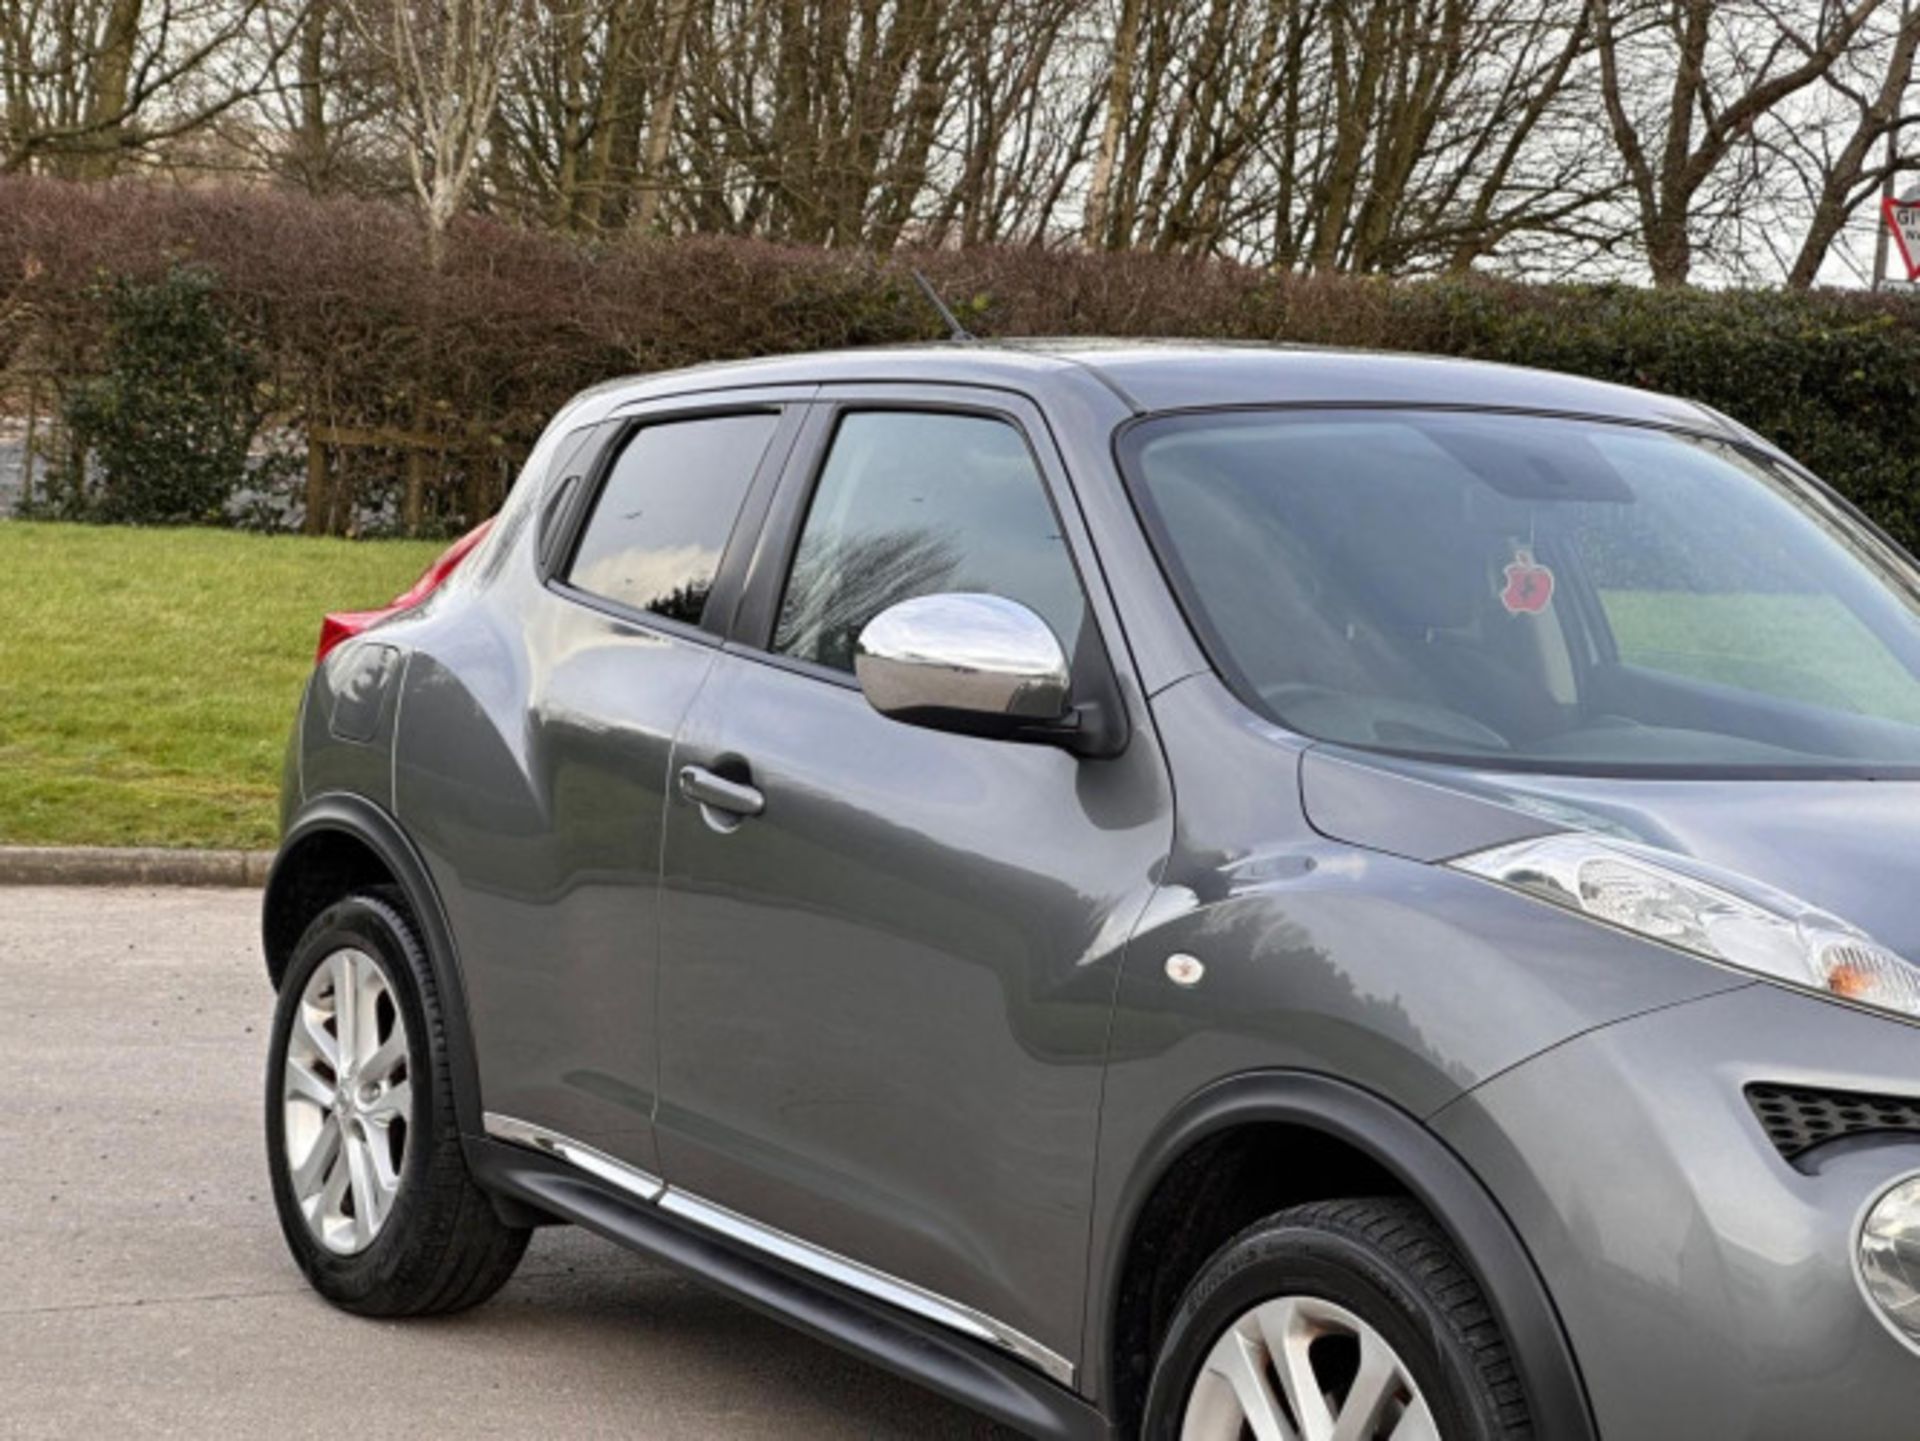 >>--NO VAT ON HAMMER--<< NISSAN JUKE 1.5 DCI ACENTA SPORT: A PRACTICAL AND SPORTY SUV - Image 91 of 97